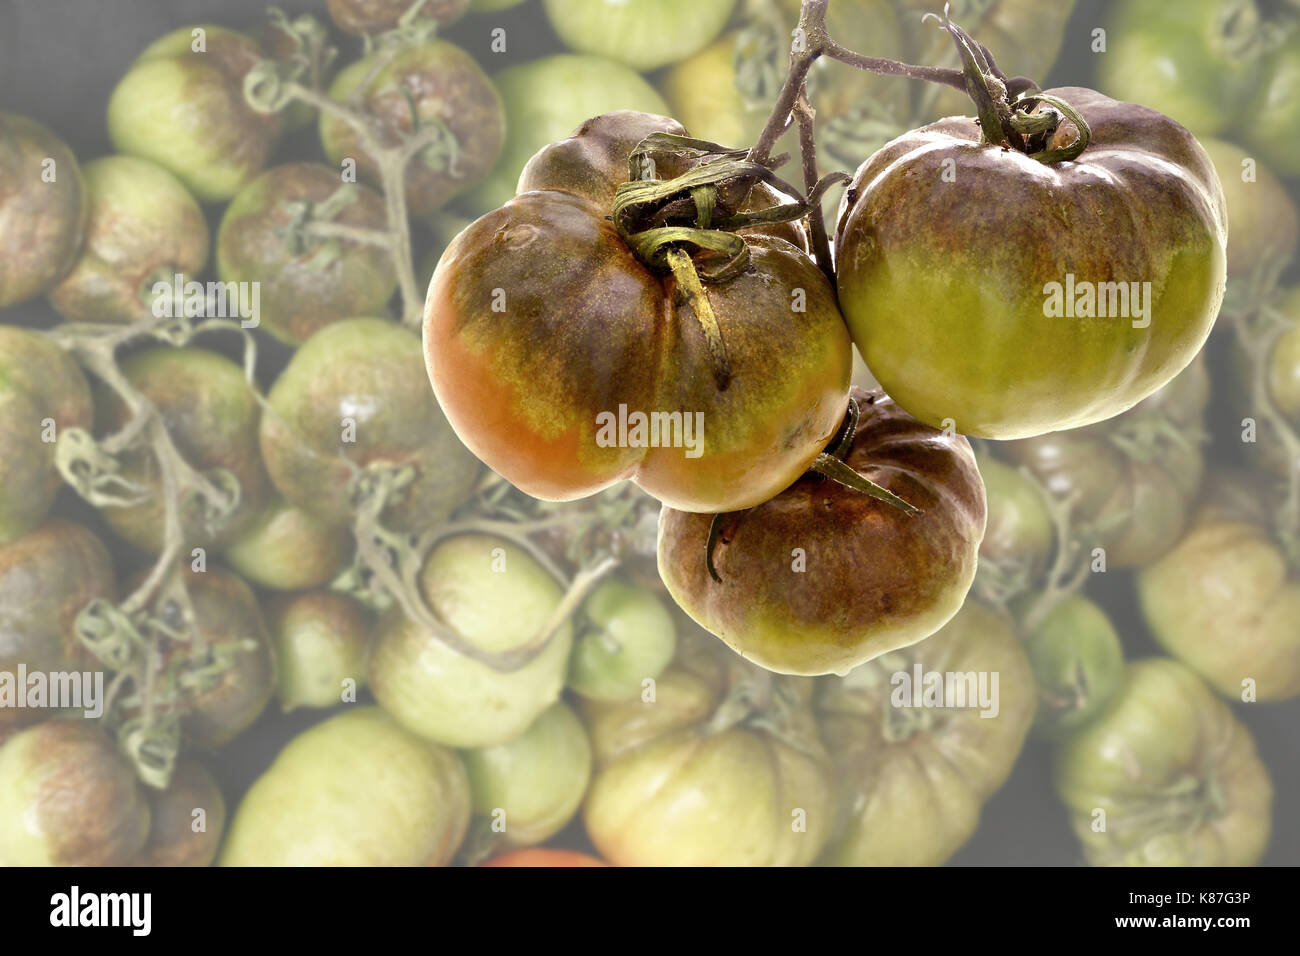 Close up image of tomatoes suffering from blight with the background faded to allow for text Stock Photo